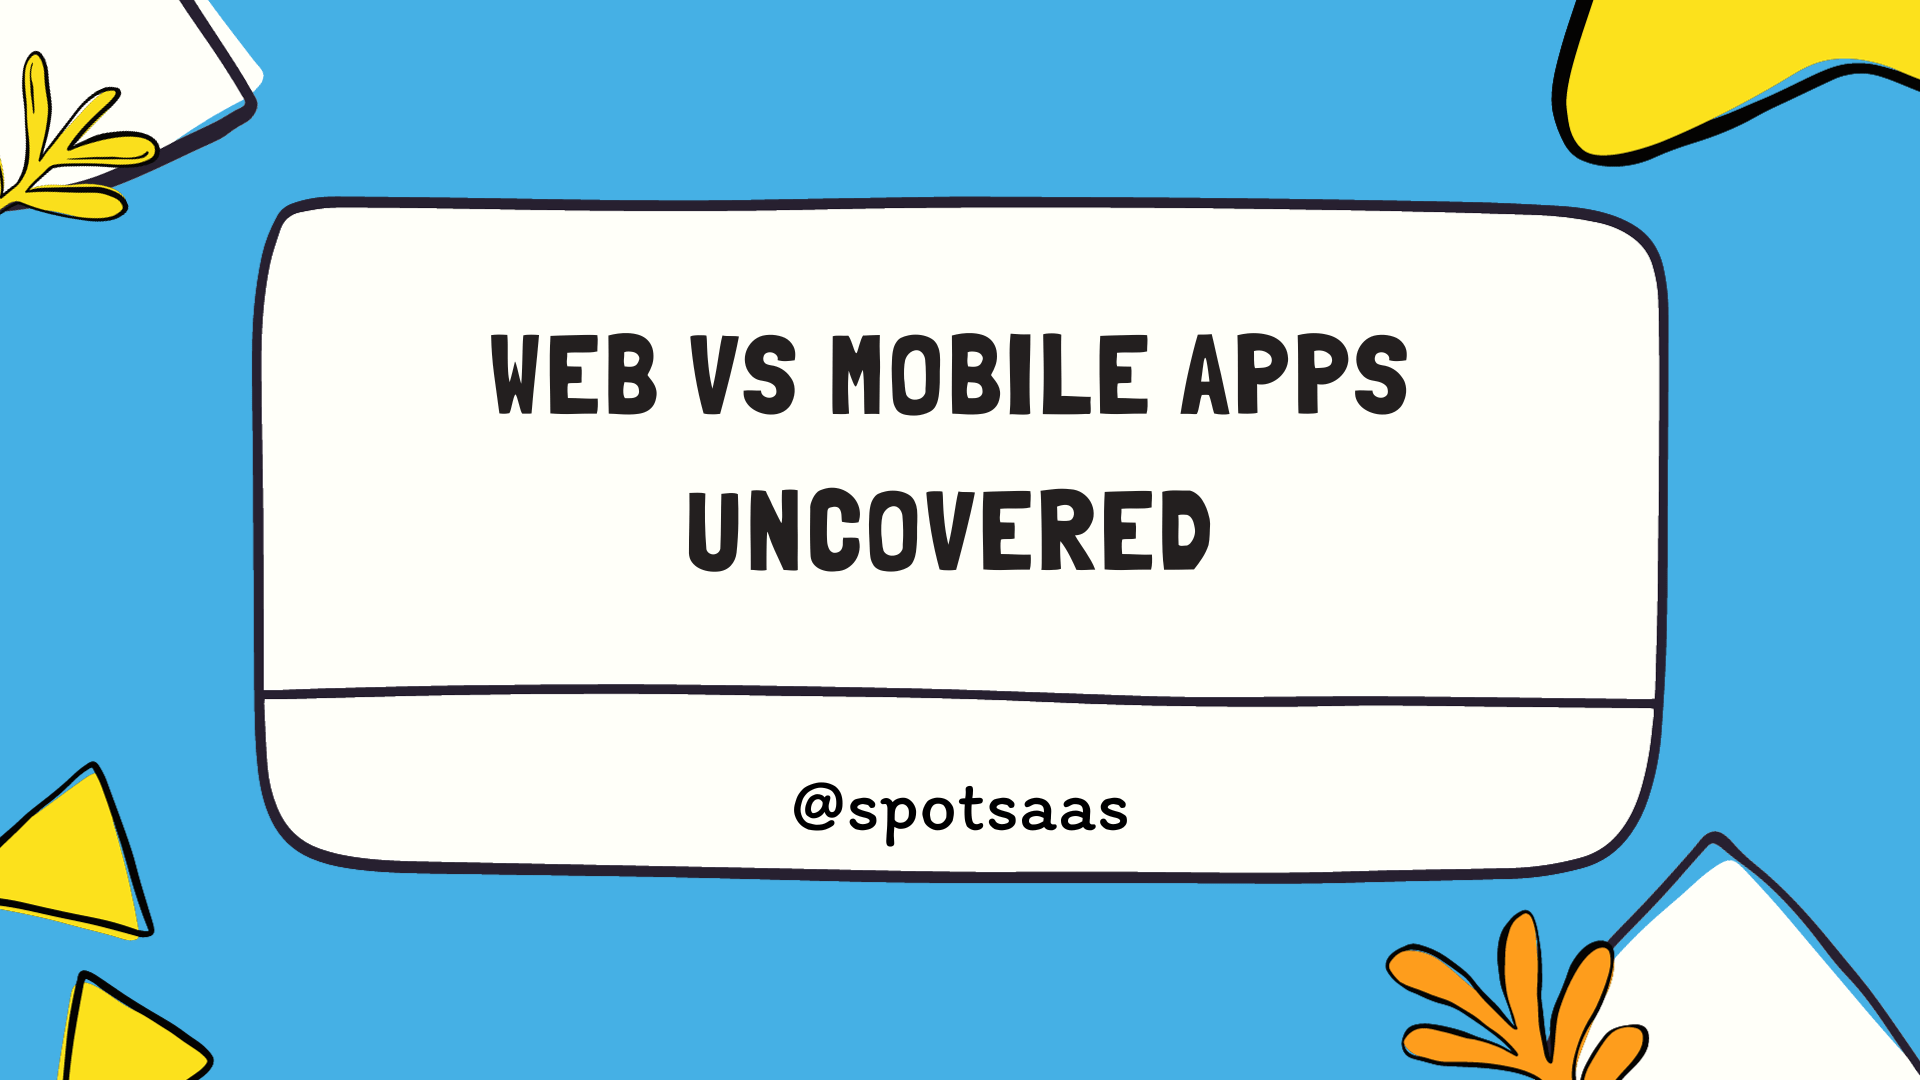 Web Apps and Mobile Apps